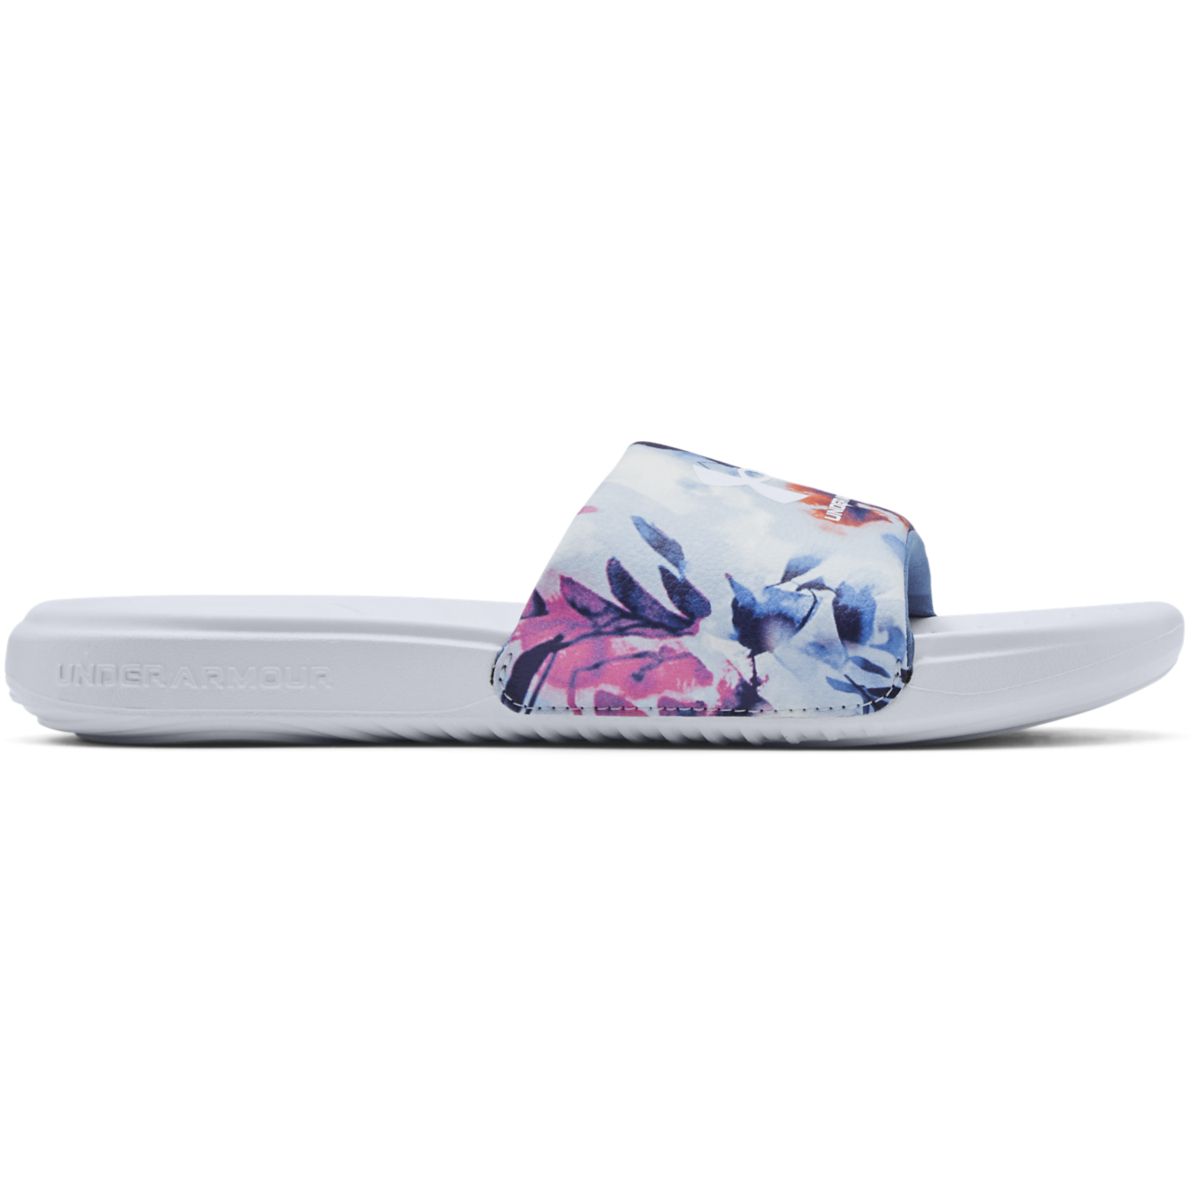 Under Armour Ansa Graphic Women's Slippers 3024436-400